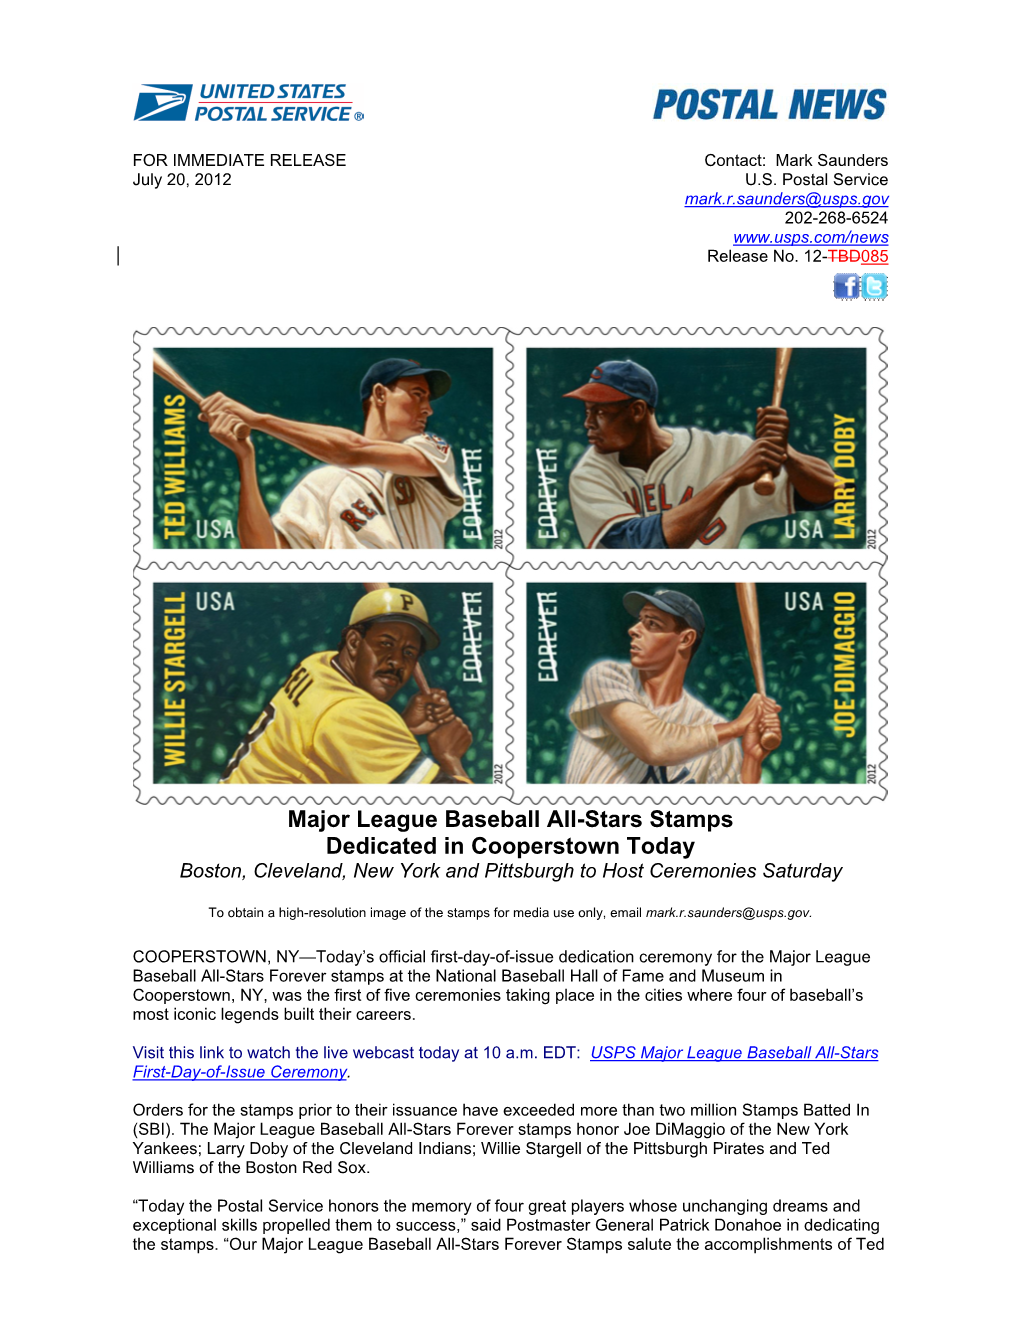 Major League Baseball All-Stars Stamps Dedicated in Cooperstown Today Boston, Cleveland, New York and Pittsburgh to Host Ceremonies Saturday